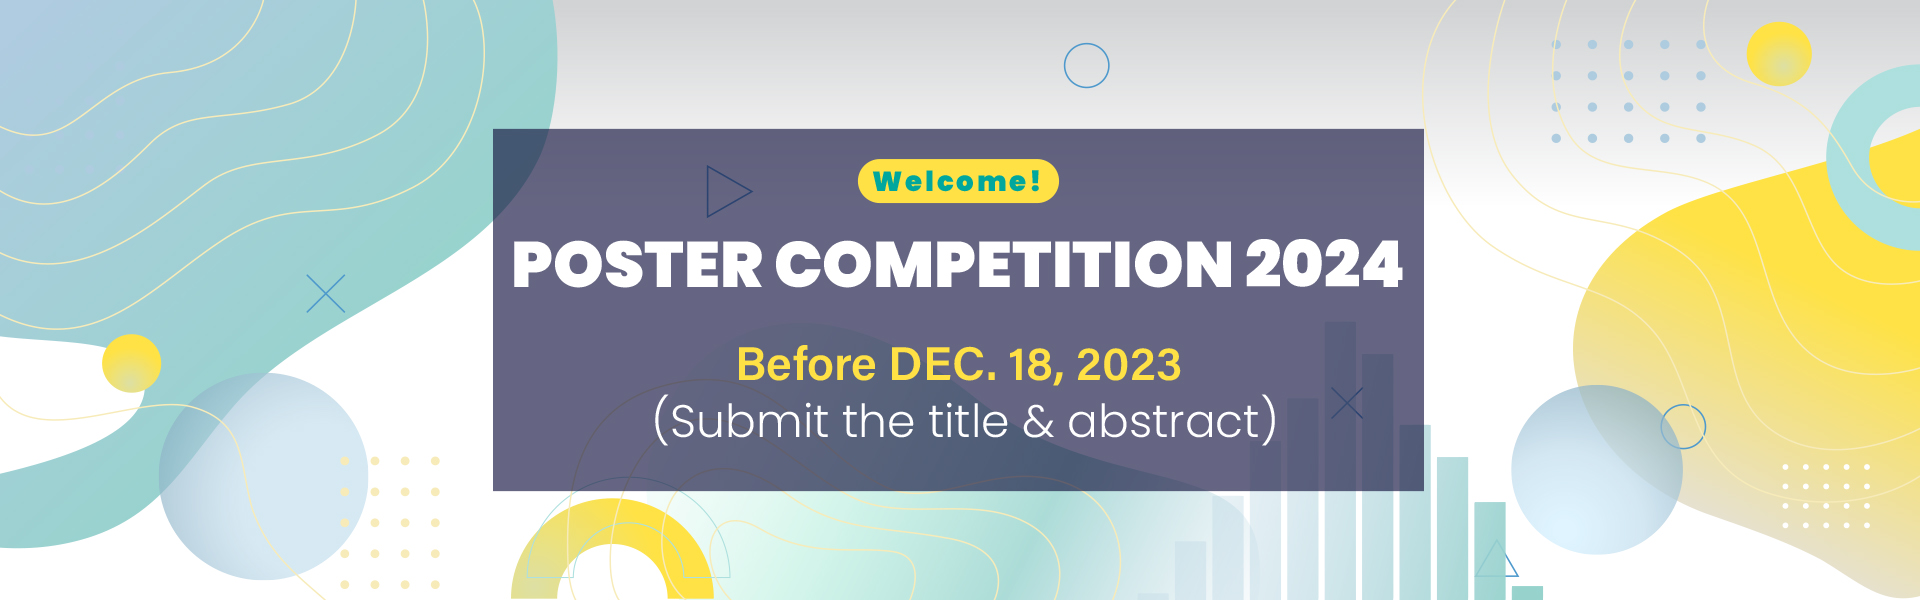 2024 POSTER COMPETITION